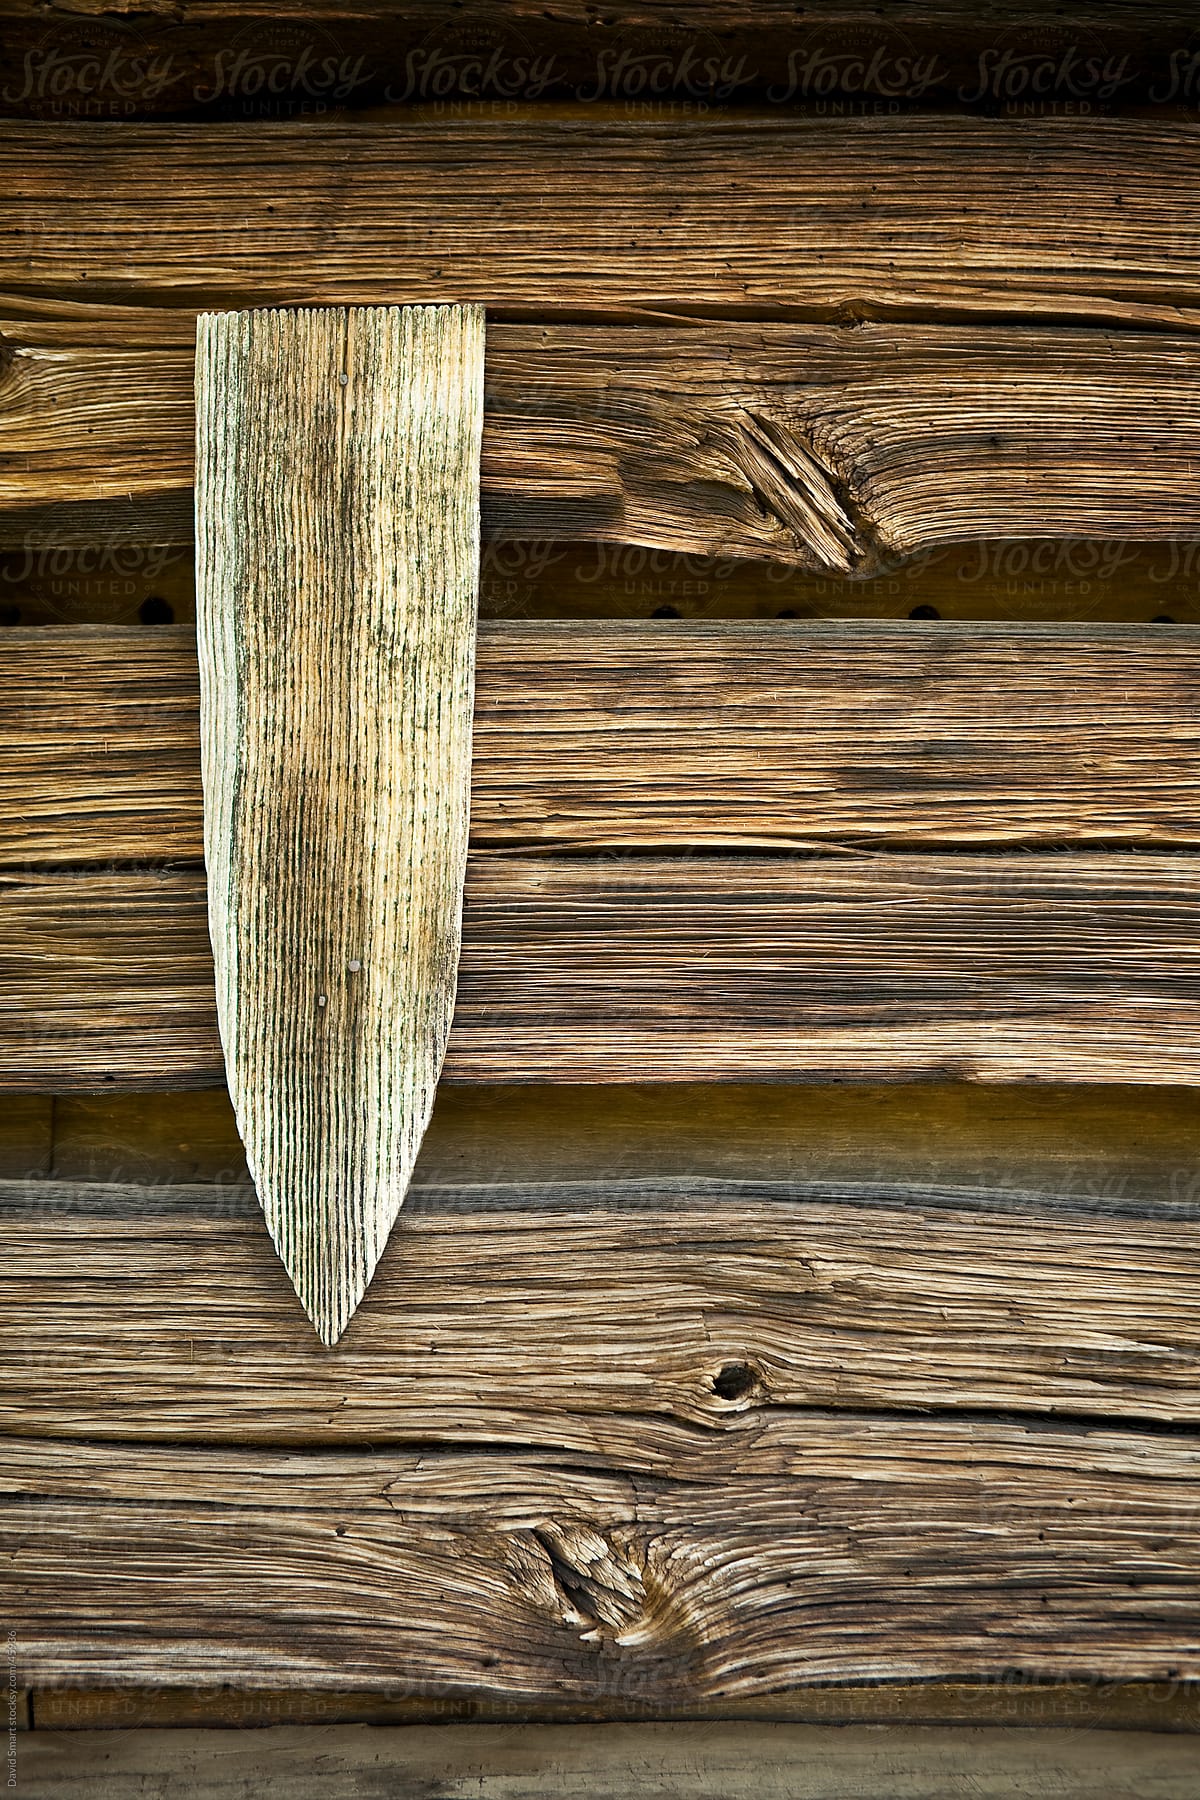 Weathered wooden arrow on a log building